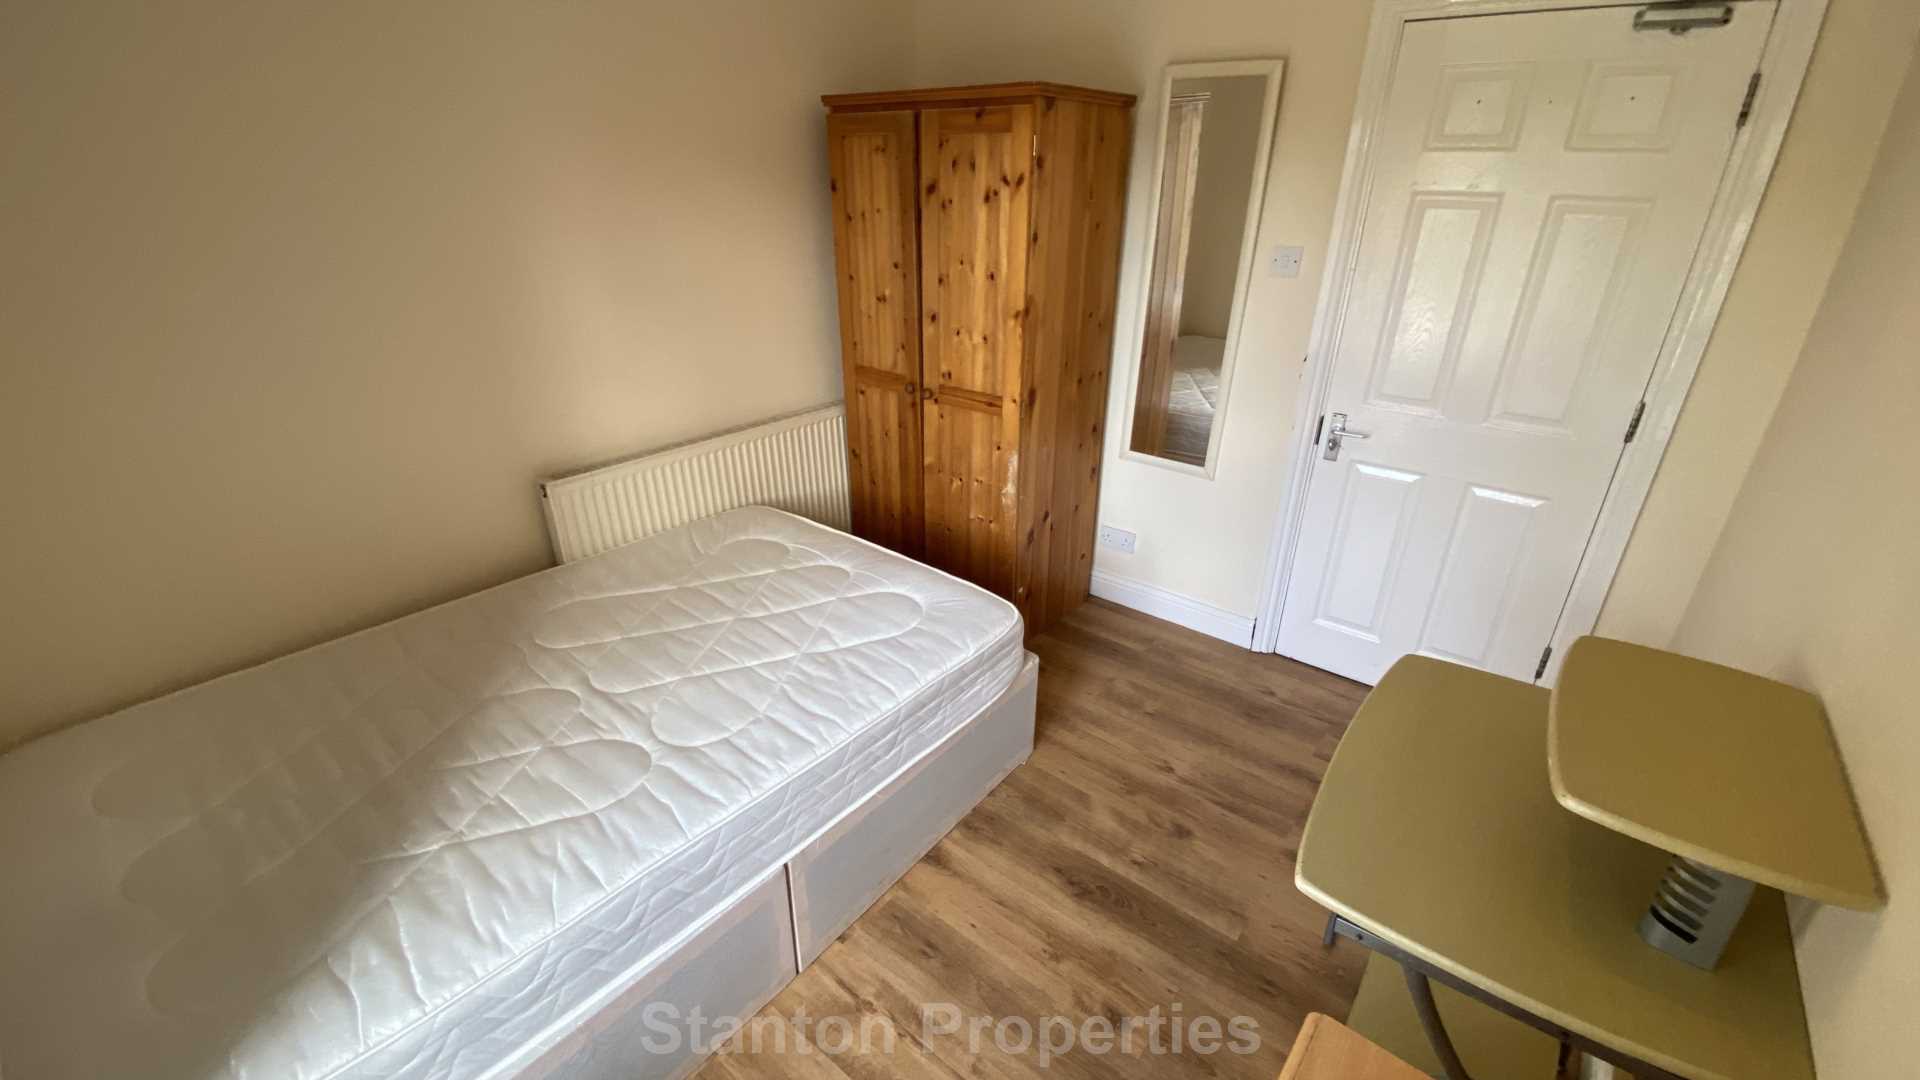 SEE VIDEO TOUR, £115 pppw excluding bills, Mauldeth Road, Withington, Image 10